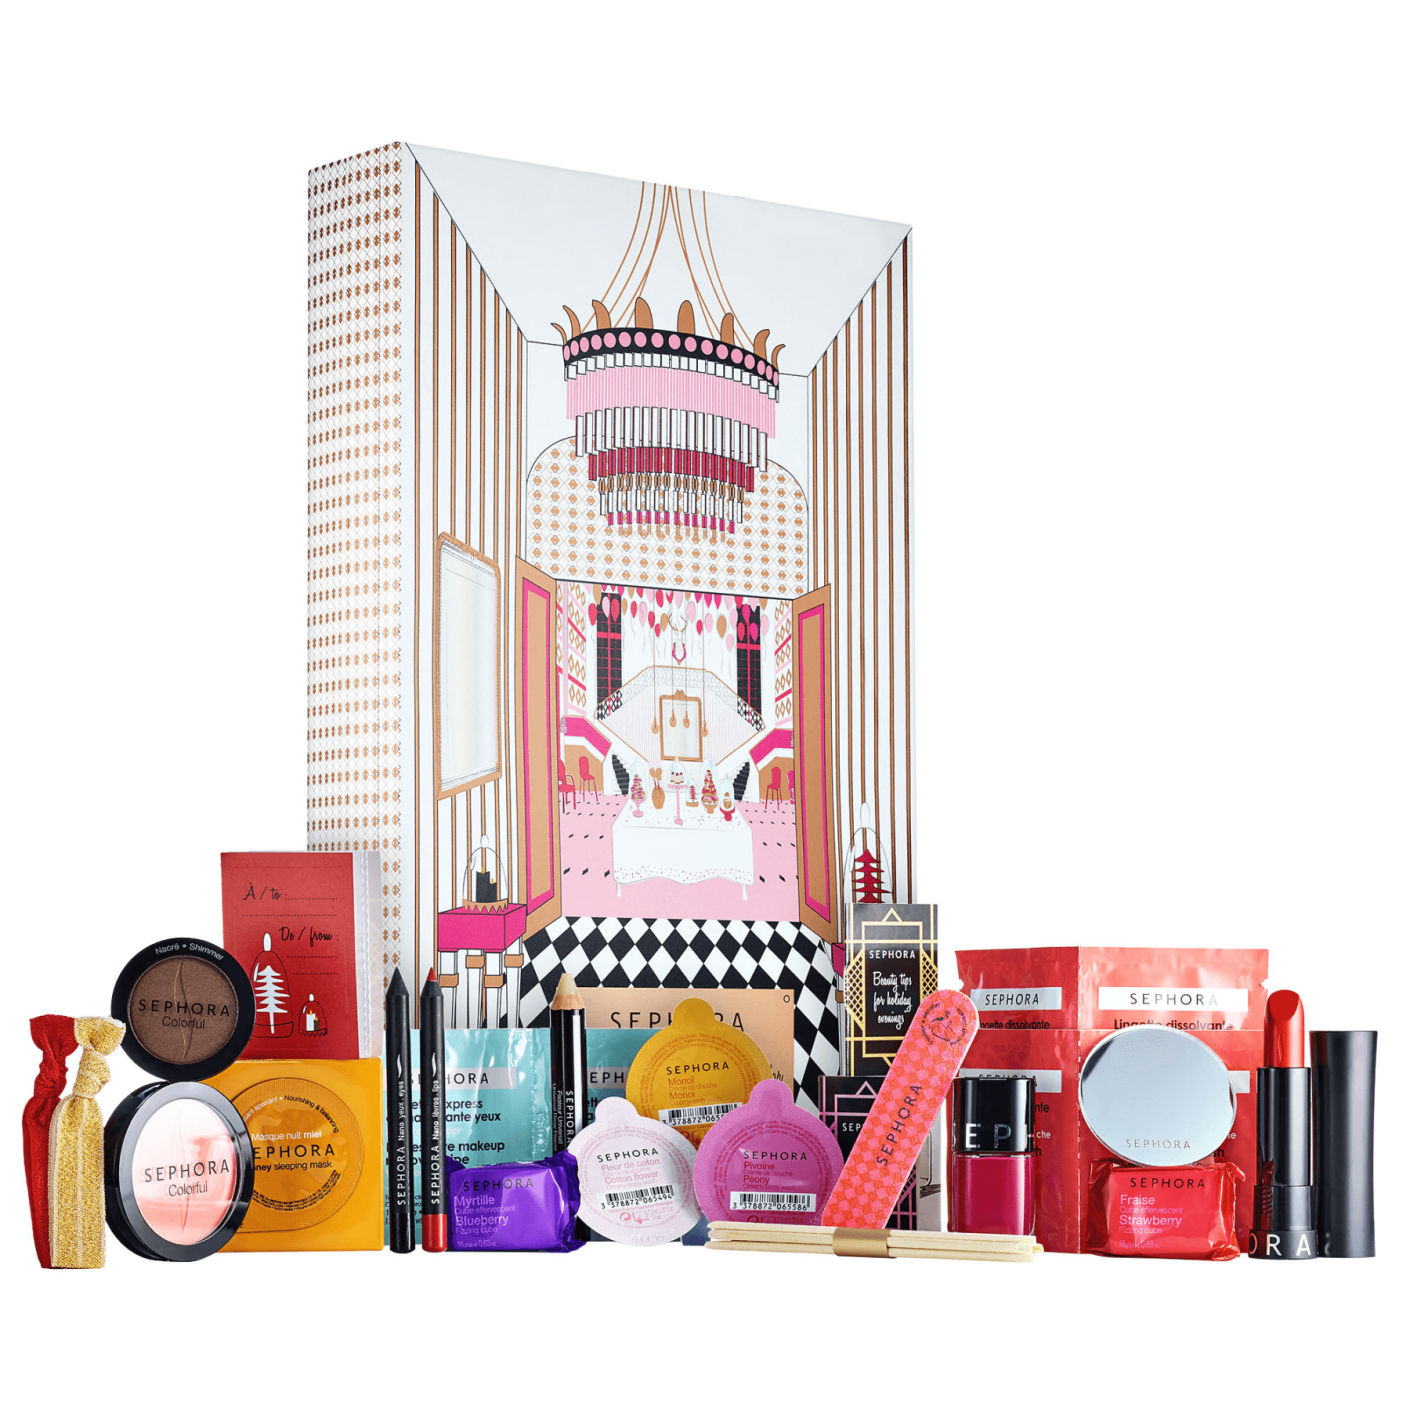 sephora-advent-calendar-reviews-get-all-the-details-at-hello-subscription